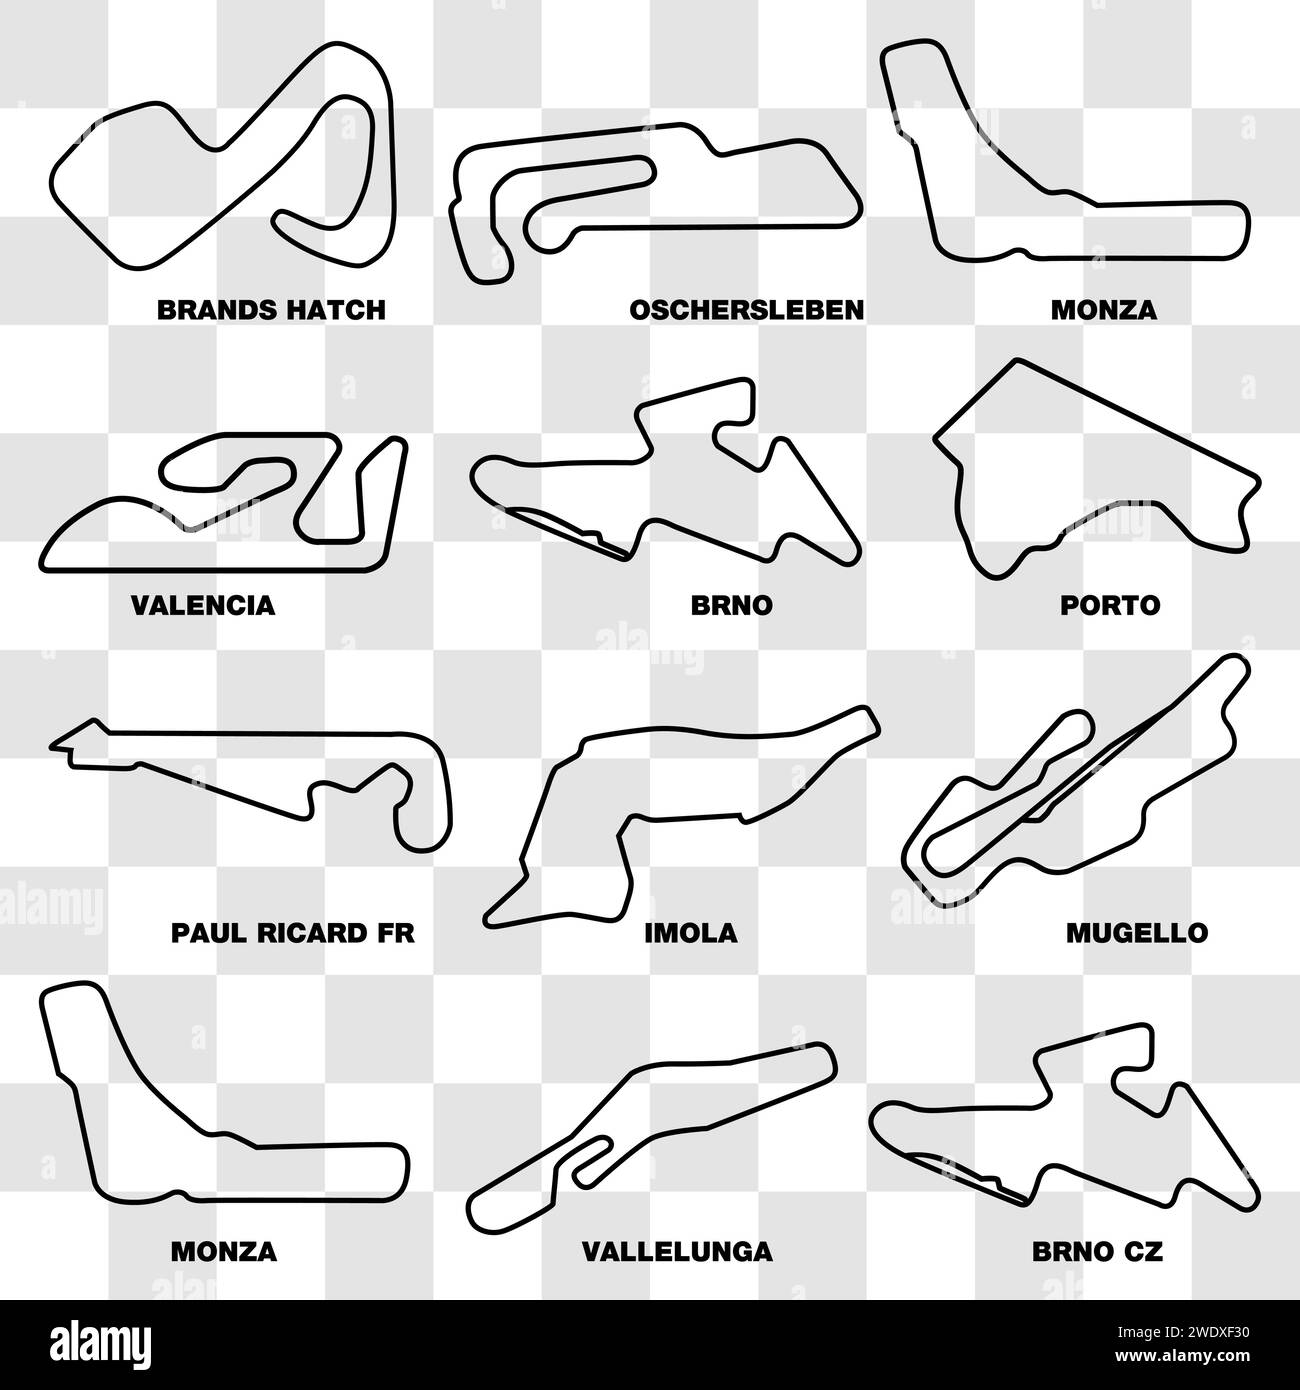 Racing circuit map collection vector illustration Stock Vector